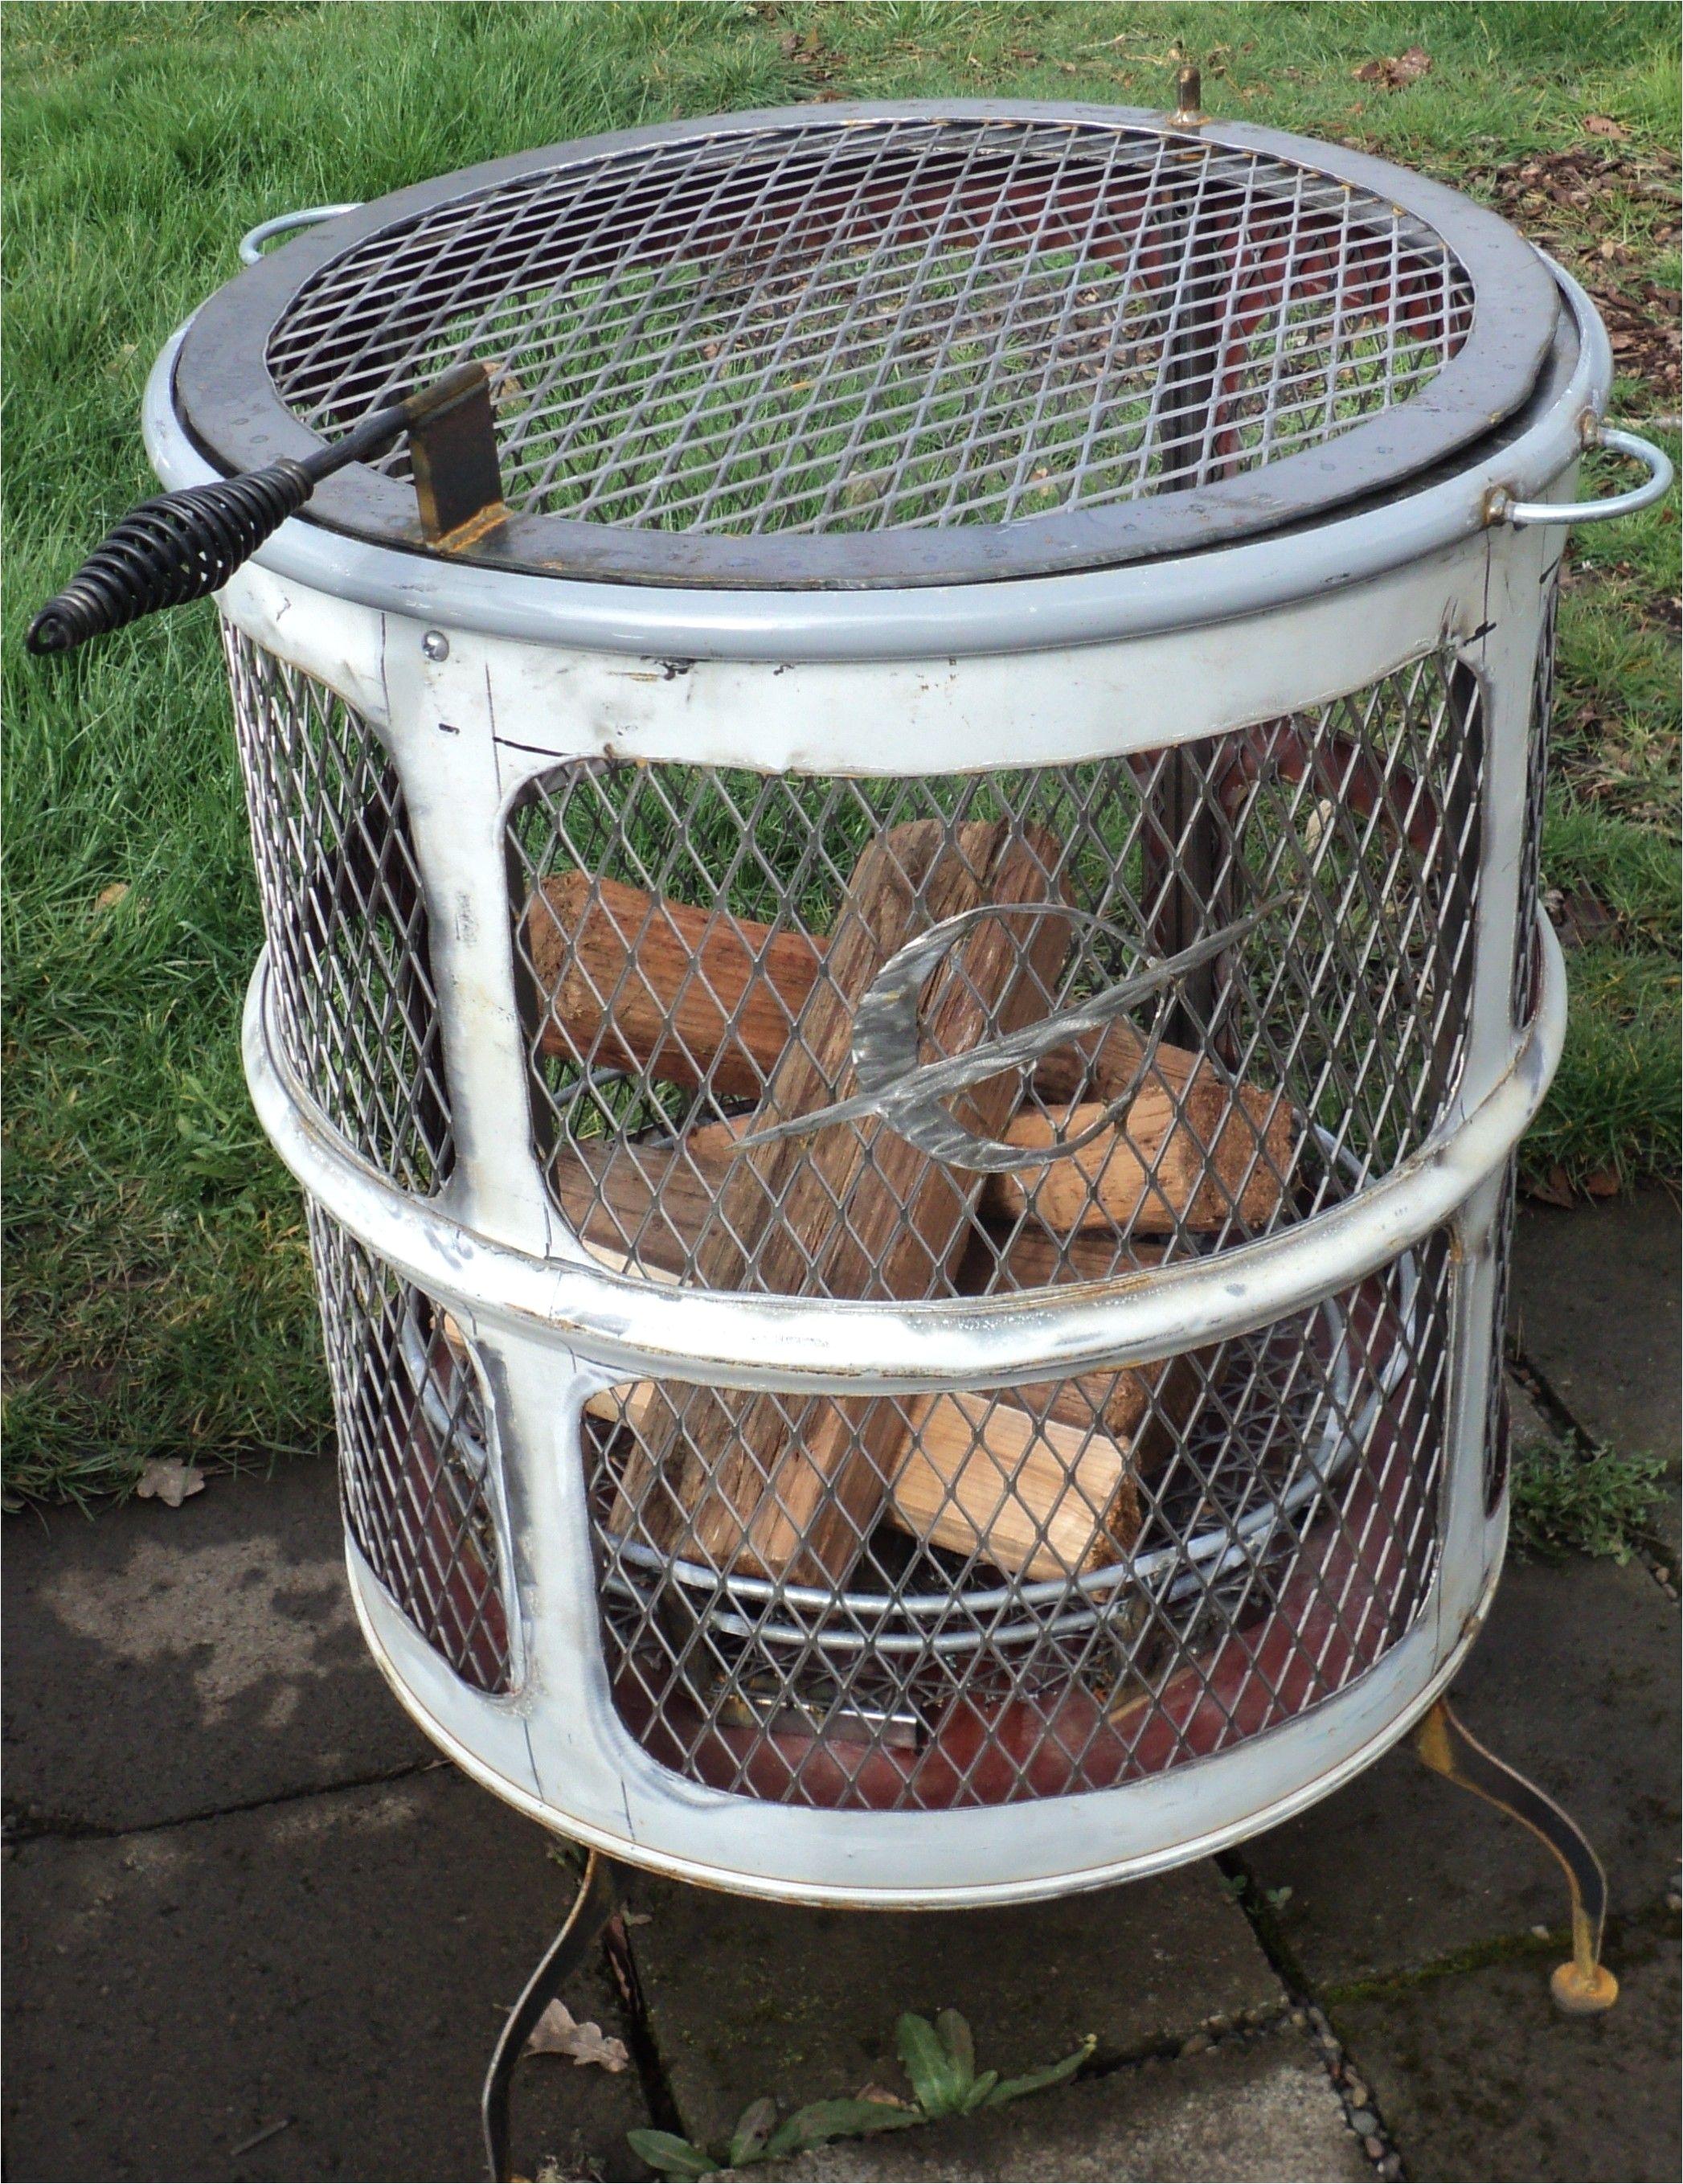 fire pit by homemade fire pit constructed from a 55 gallon drum steel plate and tubing and expanded metal mesh